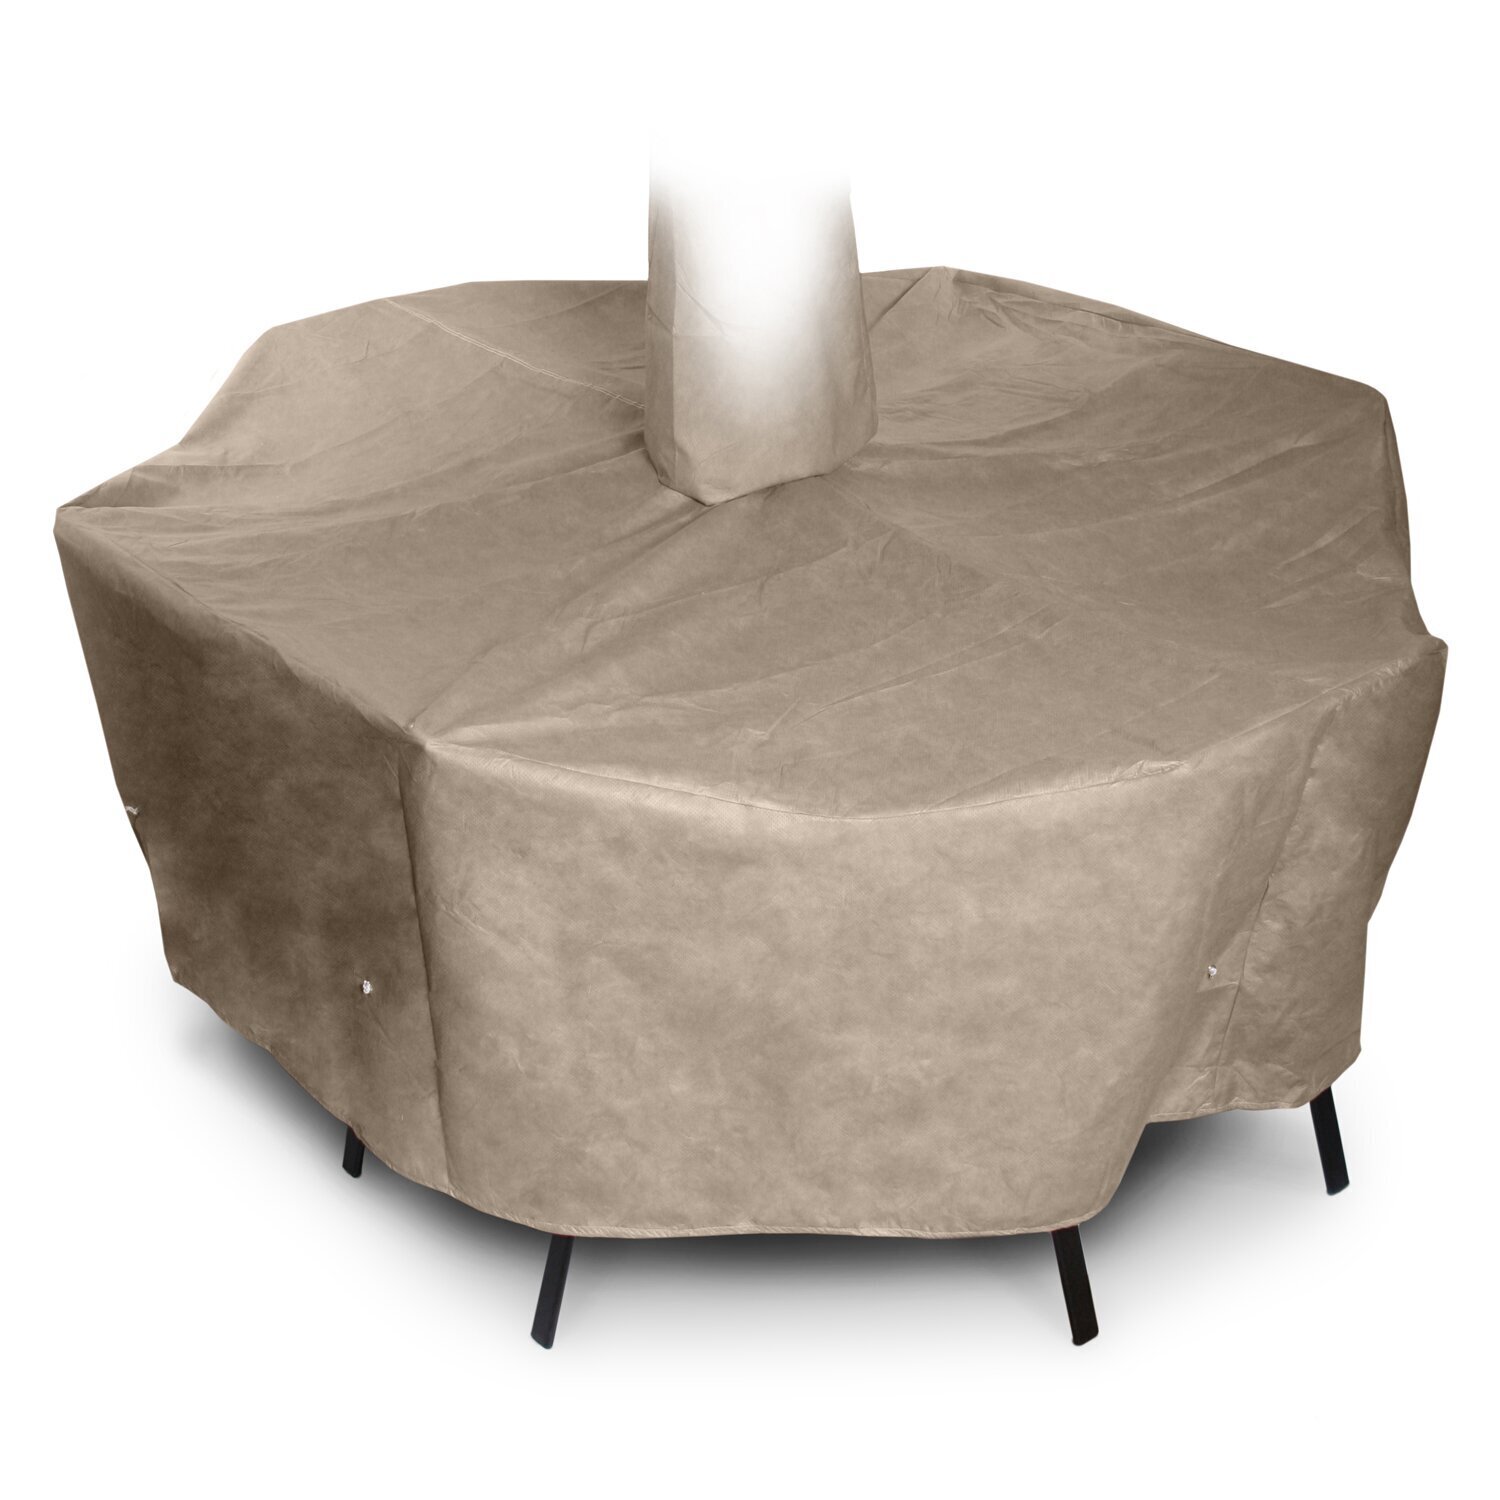 Ultimate Protection Patio Table Cover With Umbrella Hole